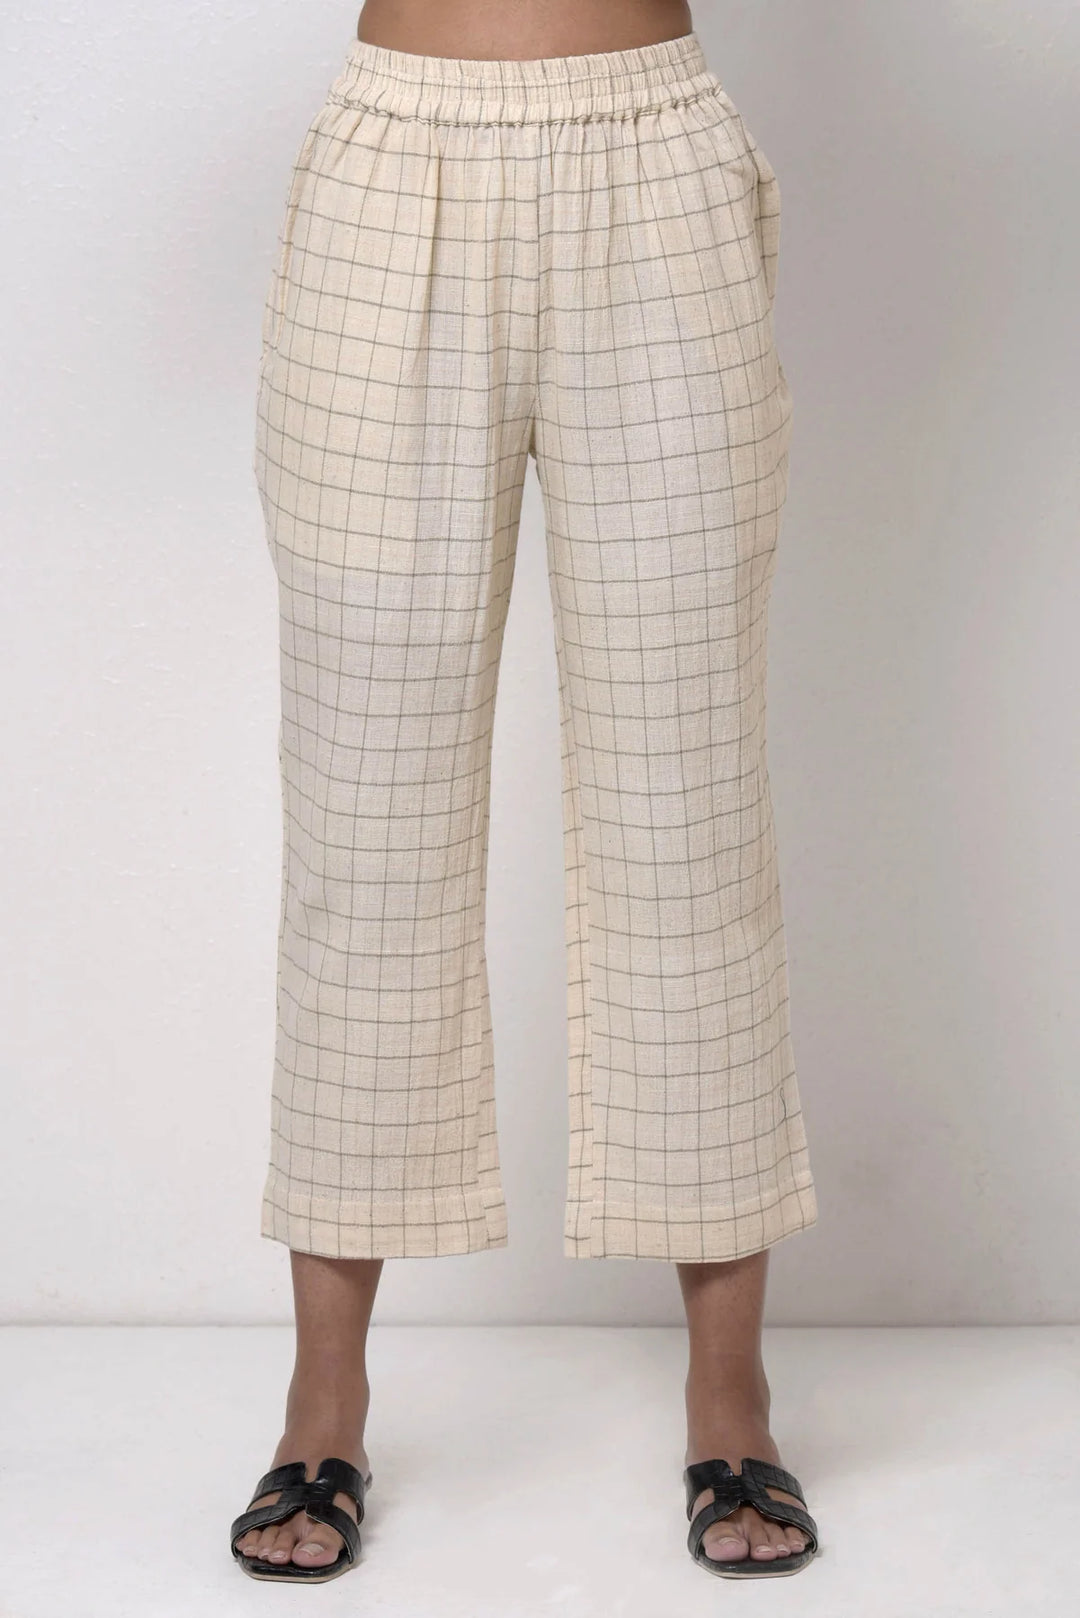 Off-White Handwoven Ankle-Length Trousers | Kiru Handwoven Trousers - Off-white